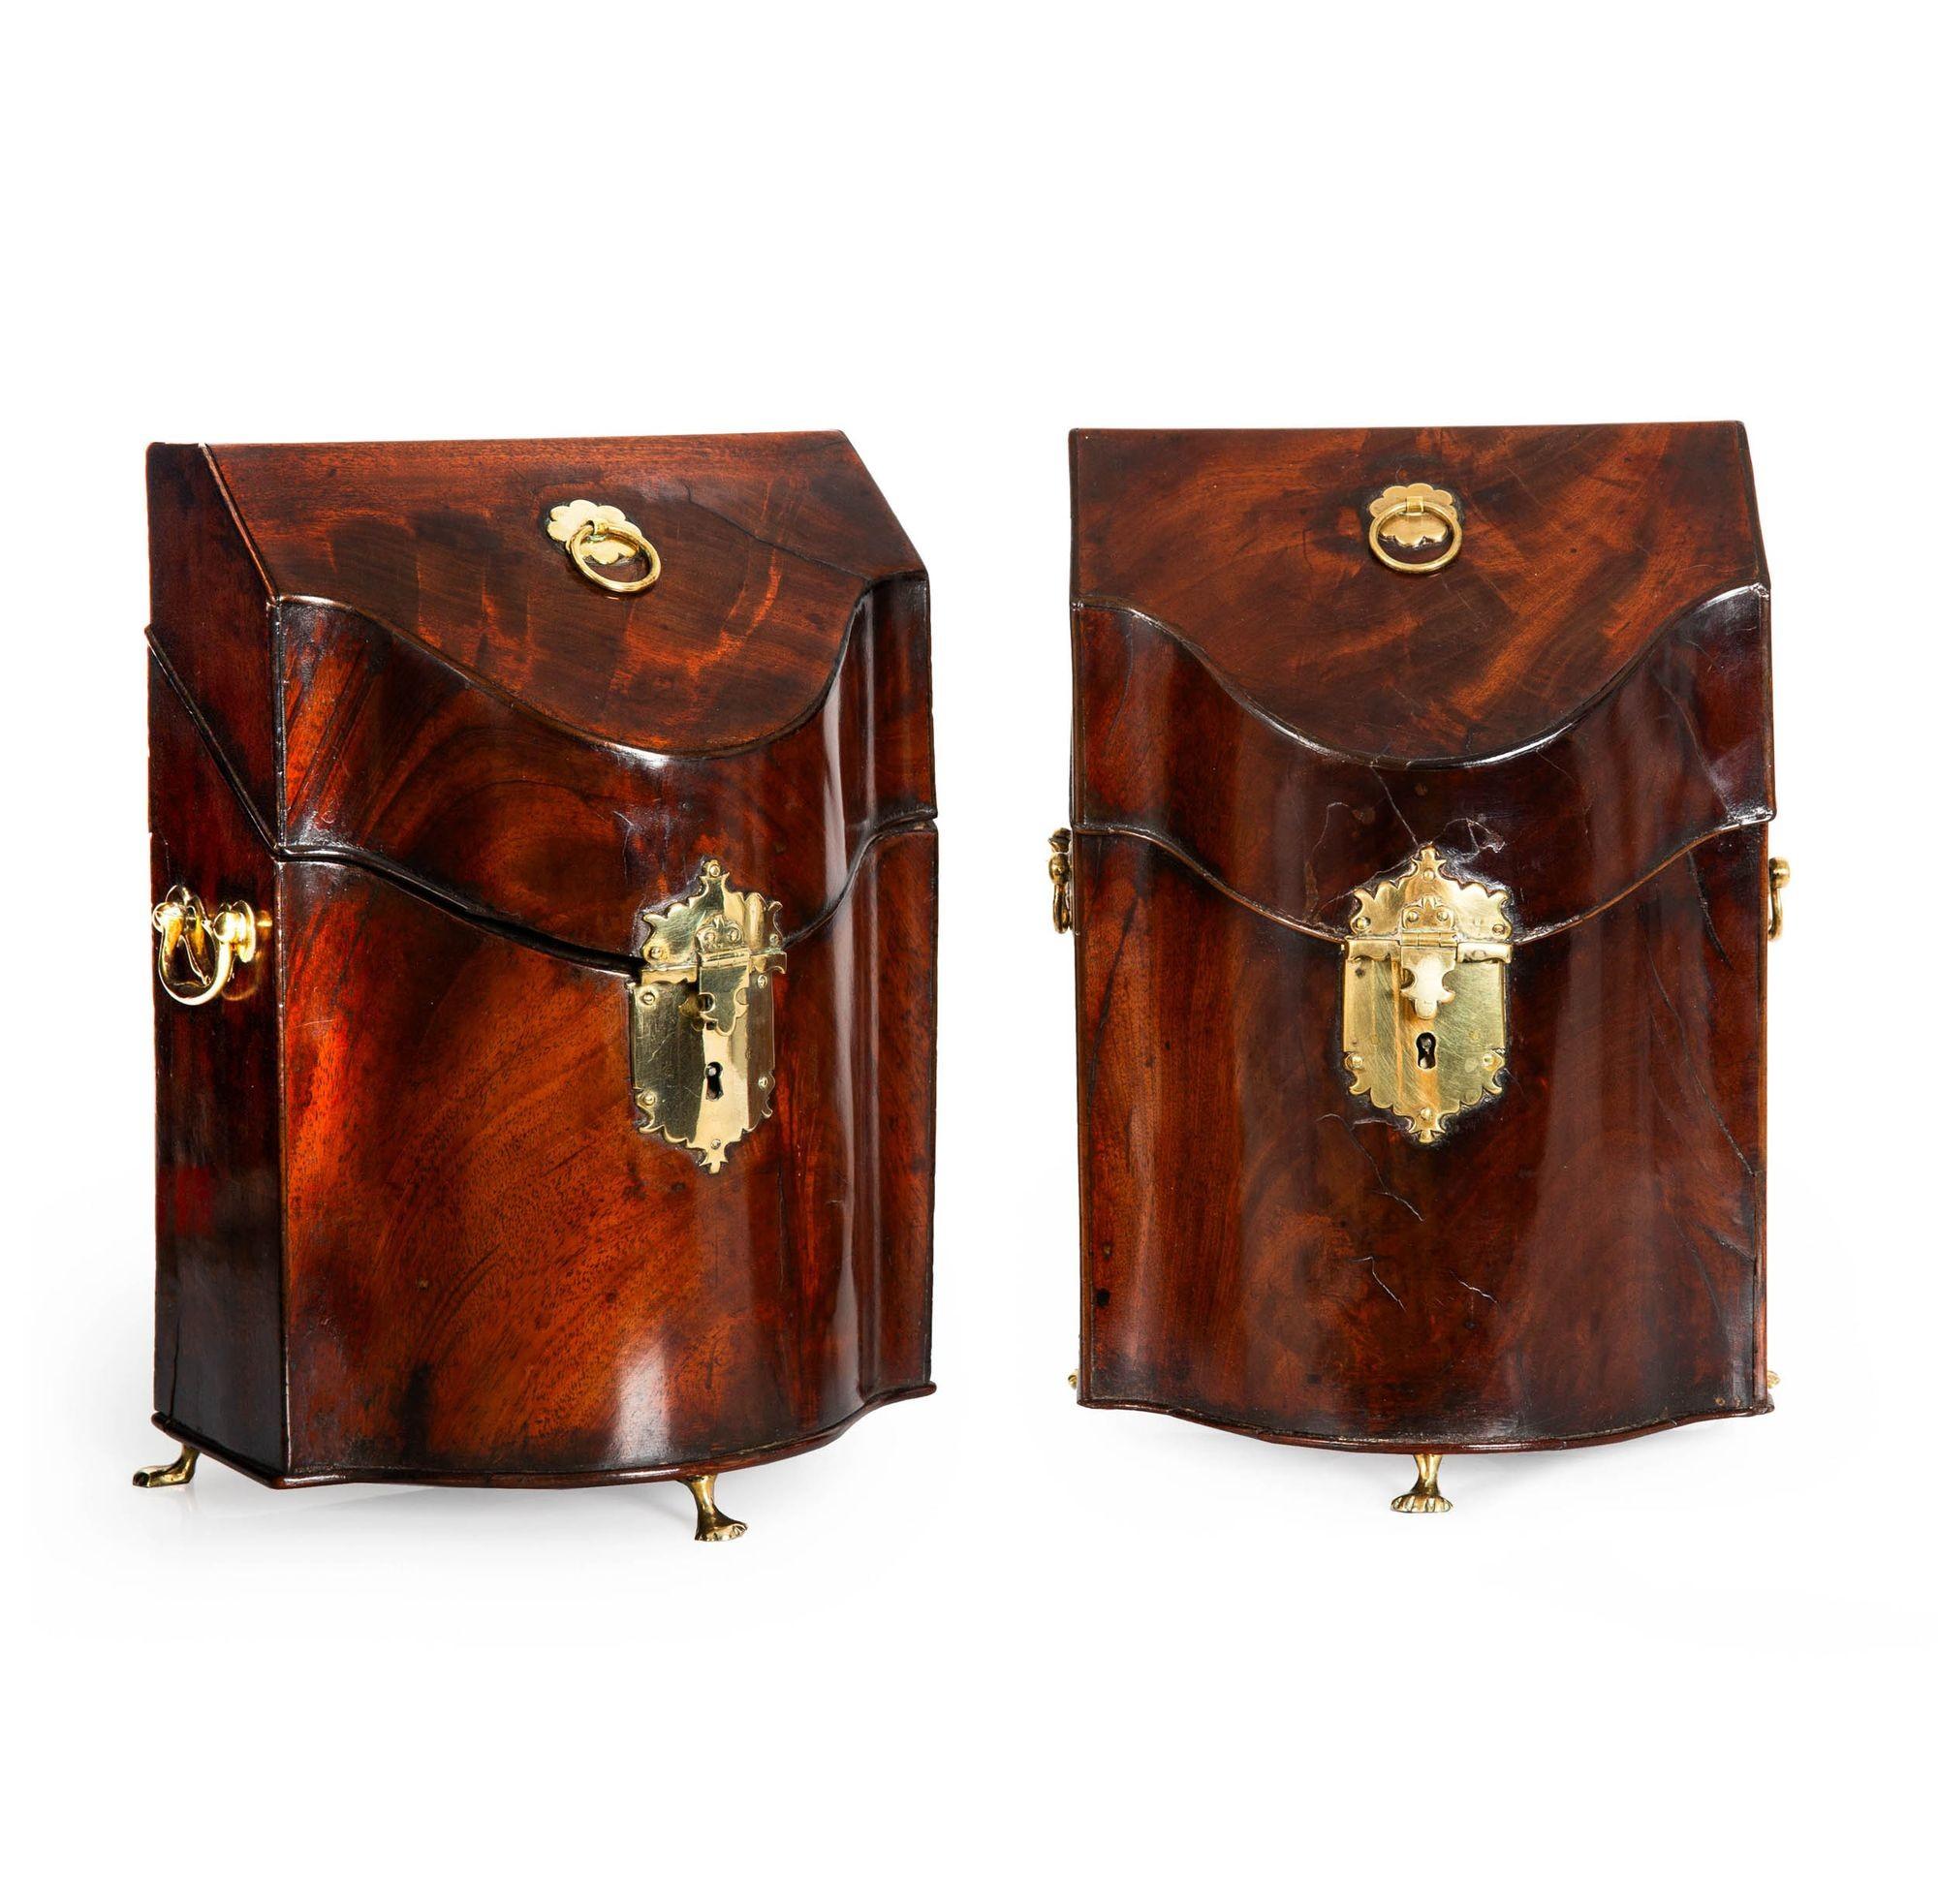 Fine Pair of English George III Period Antique Mahogany Boxes circa 1780 For Sale 3